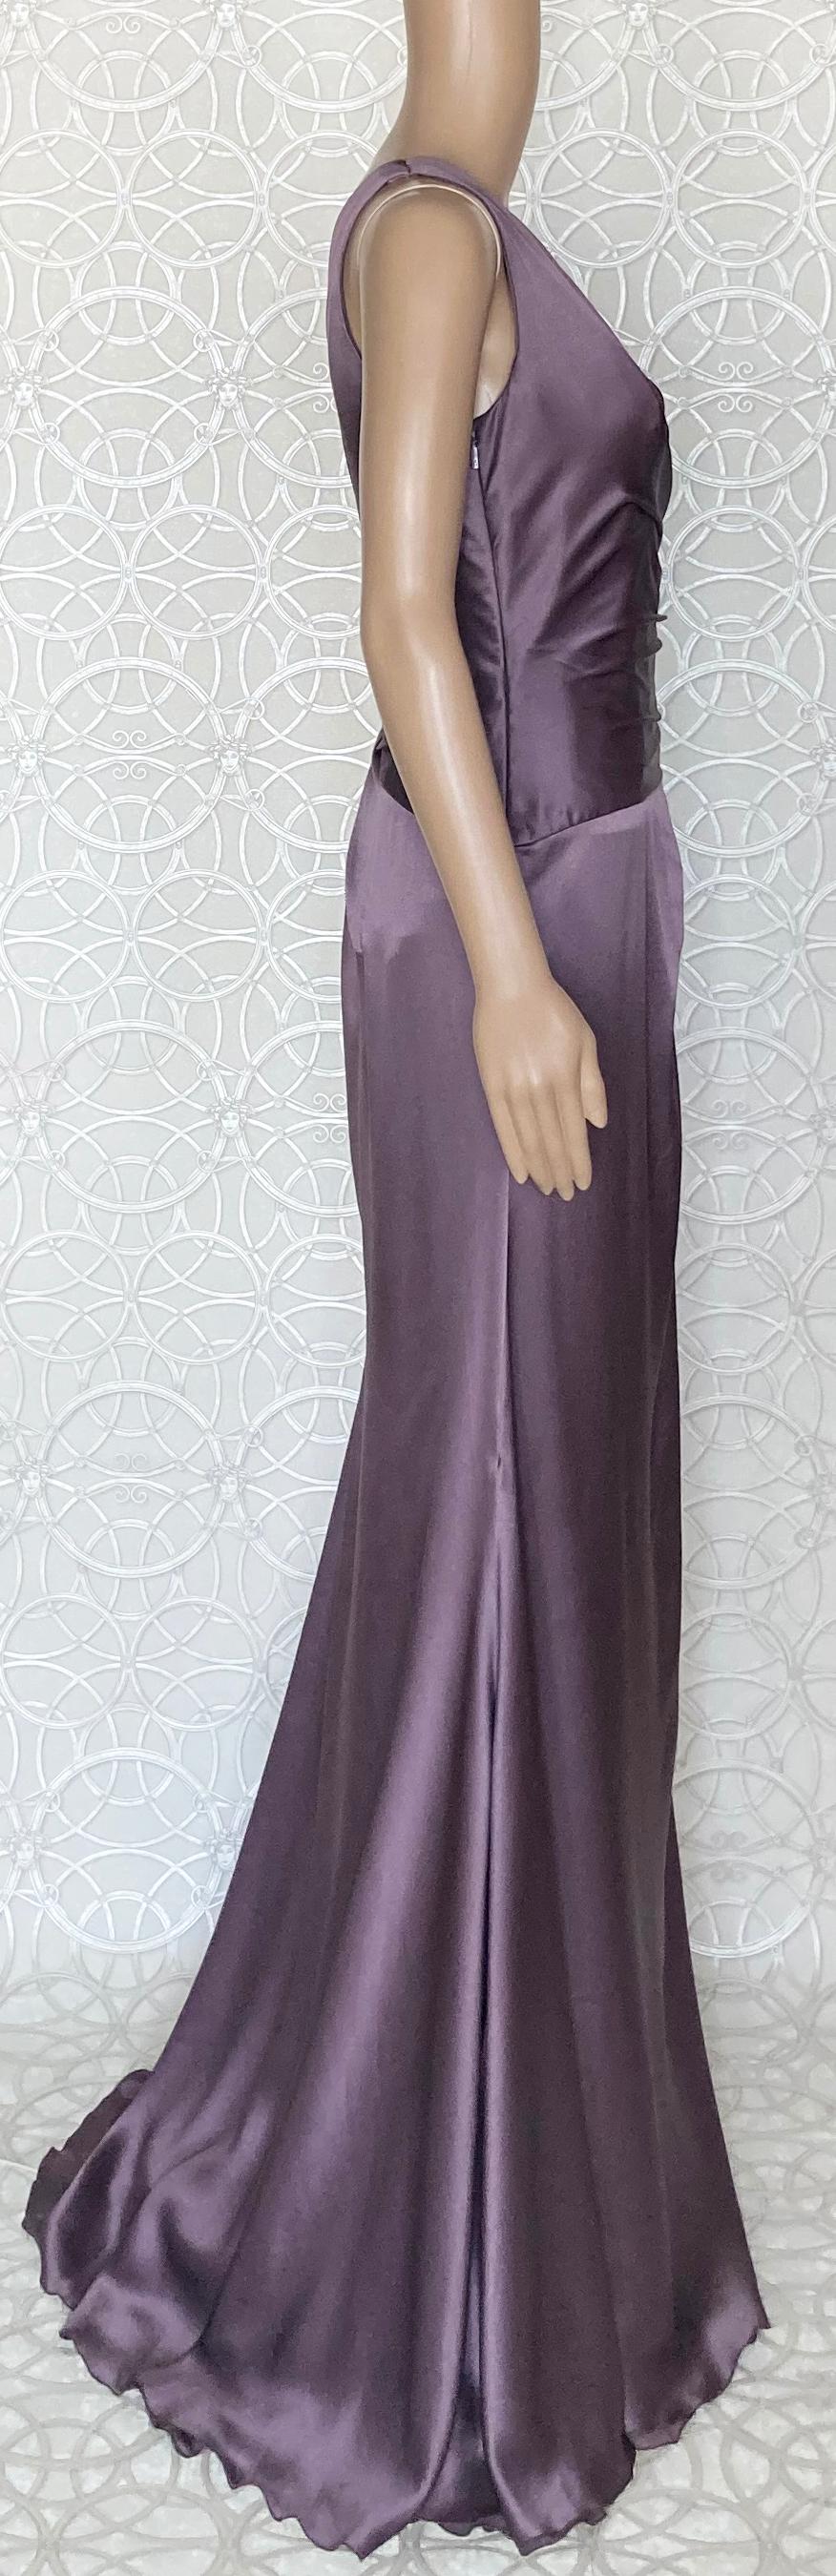 S/S 2009 L# 37 VERSACE ONE SHOULDER PURPLE LONG DRESS GOWN With HEARTS 46 - 10 For Sale 3